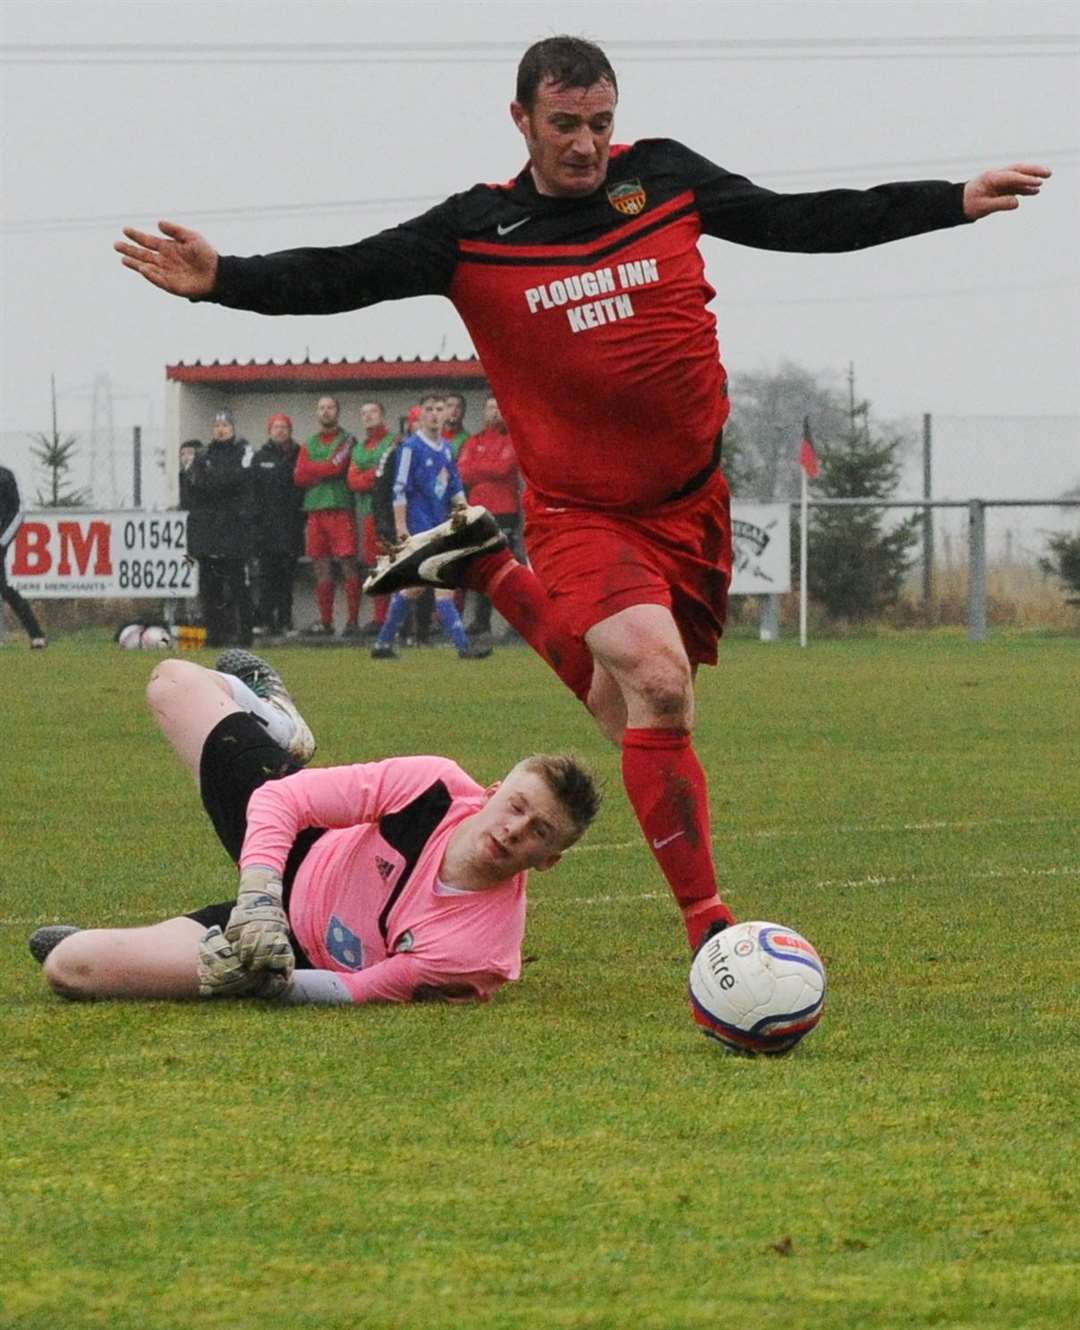 David Blackhall scored for Aberlour in their cup defeat at Hopeman.